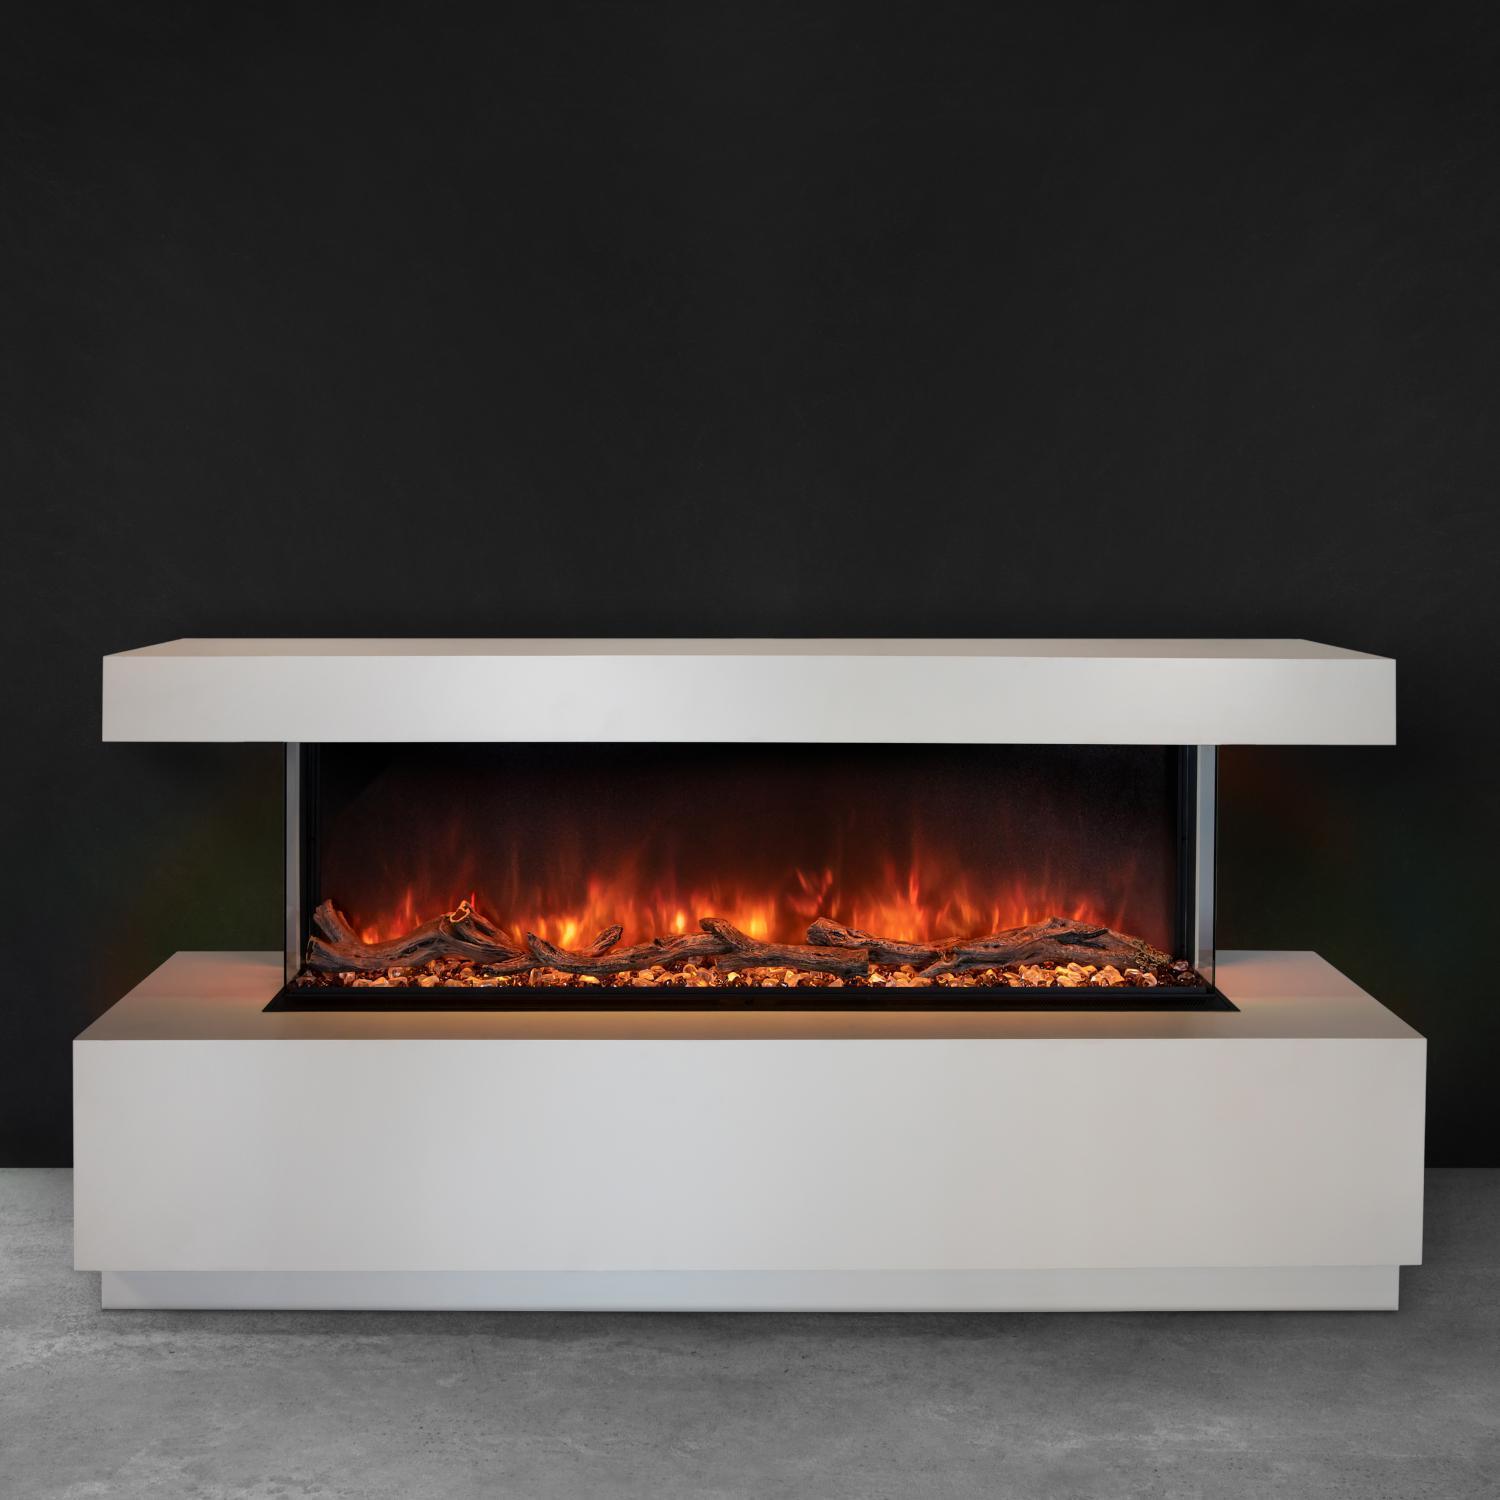 Electric fireplace installed in a floor cabinet | Modern Flames 96" Landscape Pro Multi-Sided Built-In Electric Fireplace